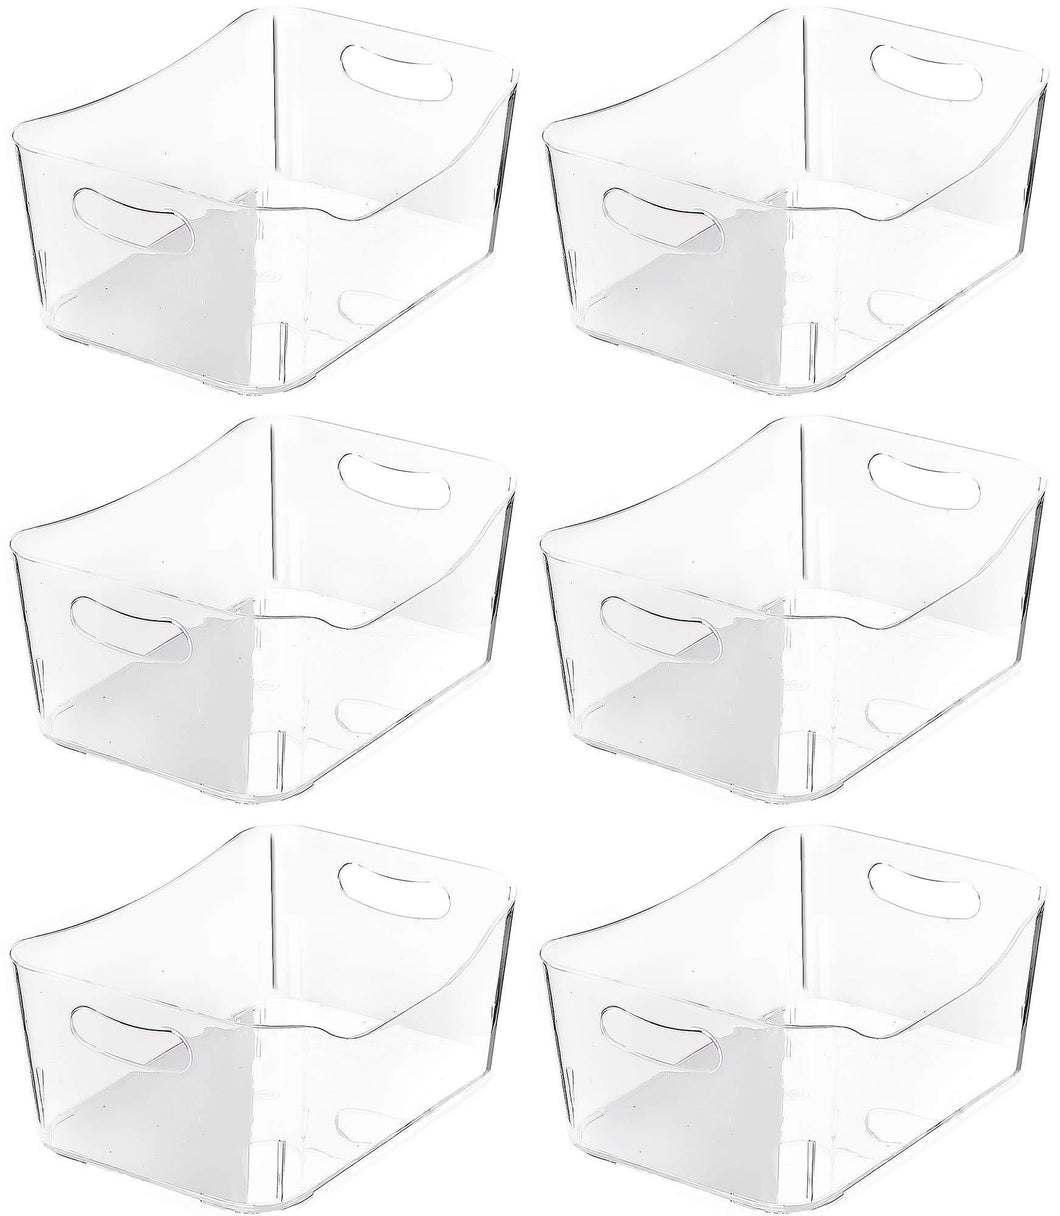 Top rated ybm home open bin storage basket kitchen pantry bathroom vanity laundry health and beauty product supply organizer under cabinet caddy medium 6 pack clear